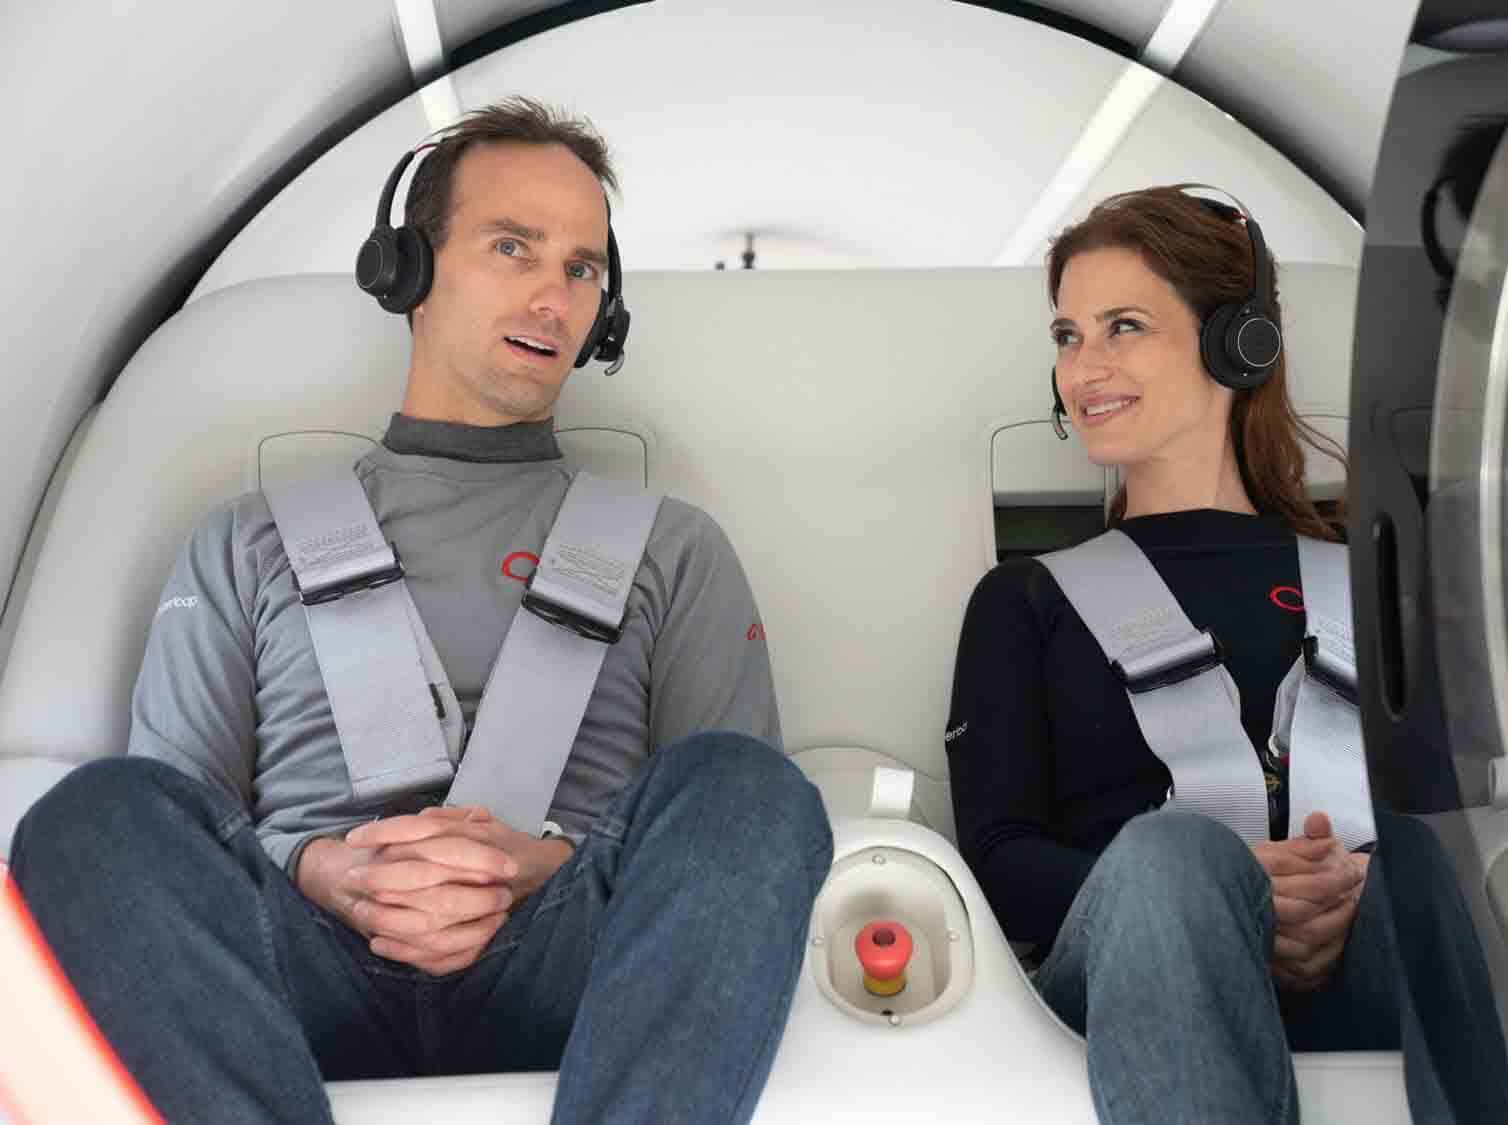 Josh Giegel, Co-Founder and Chief Technology Officer, and Sara Luchian, Director of Passenger Experience, were the first people in the world to ride on this new form of transportation.